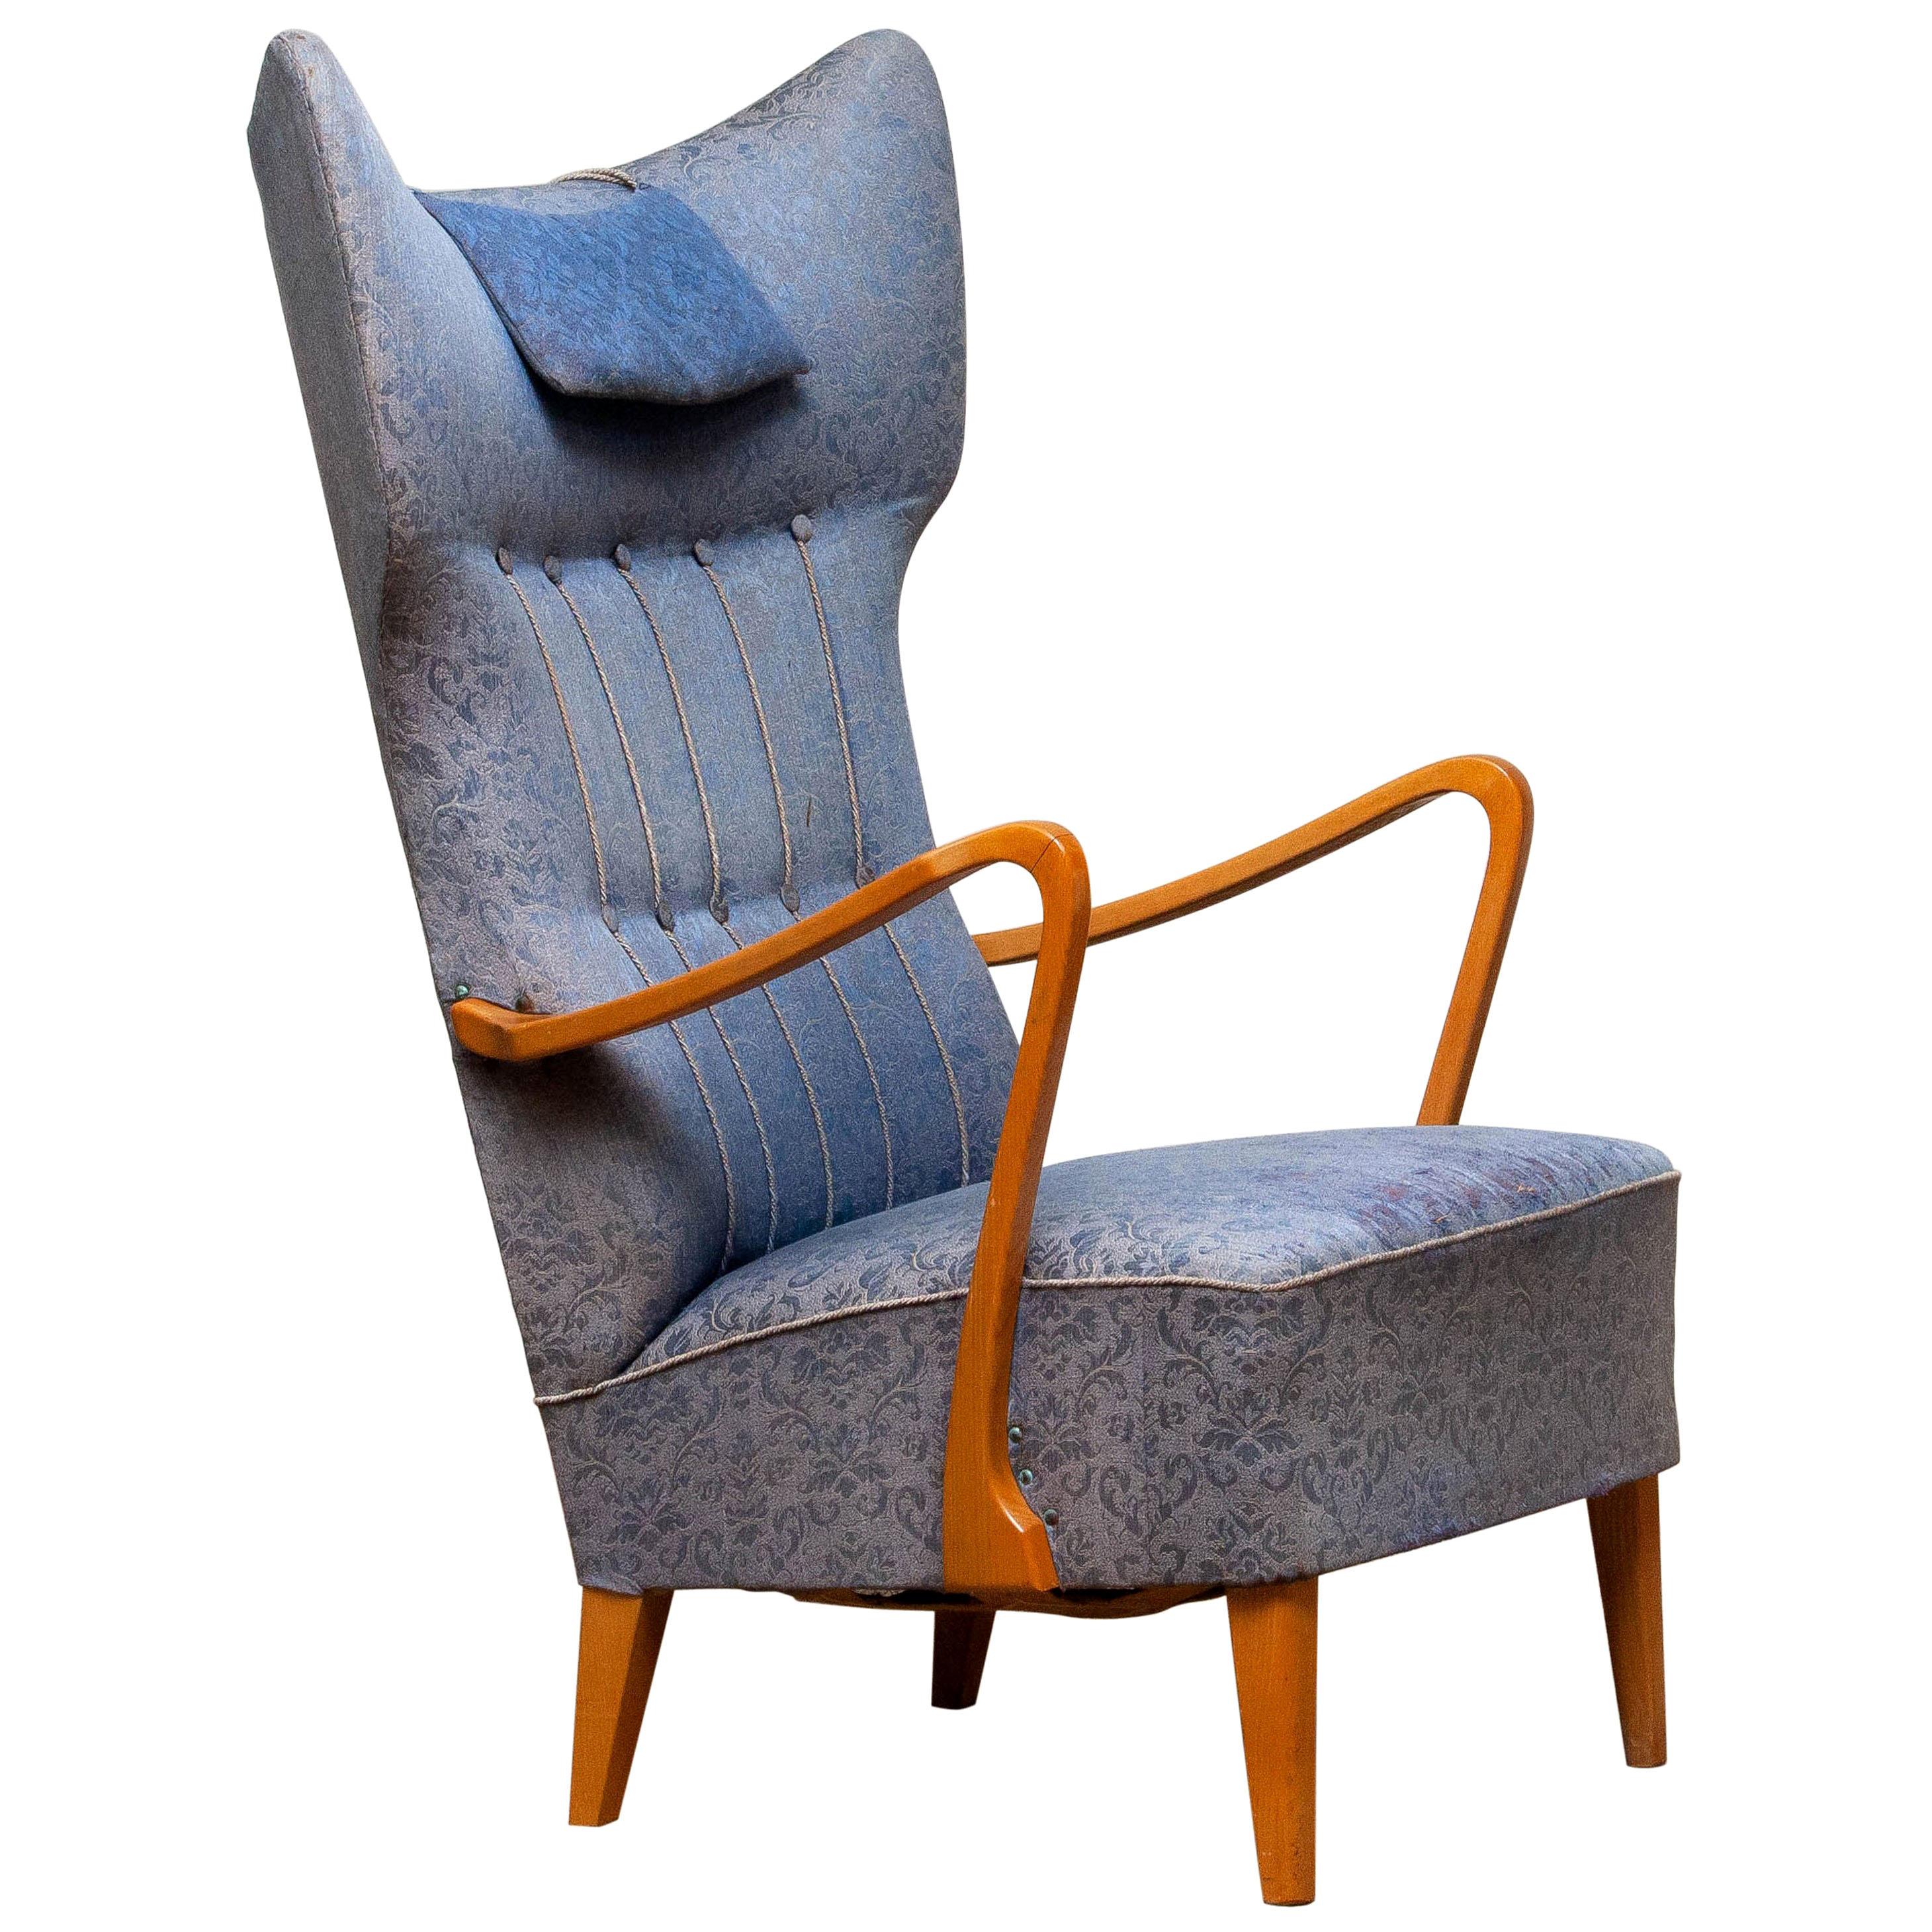 1920s, Slim Art Nouveau Swedish Wingback Chair in Oak with Extra High Backrest